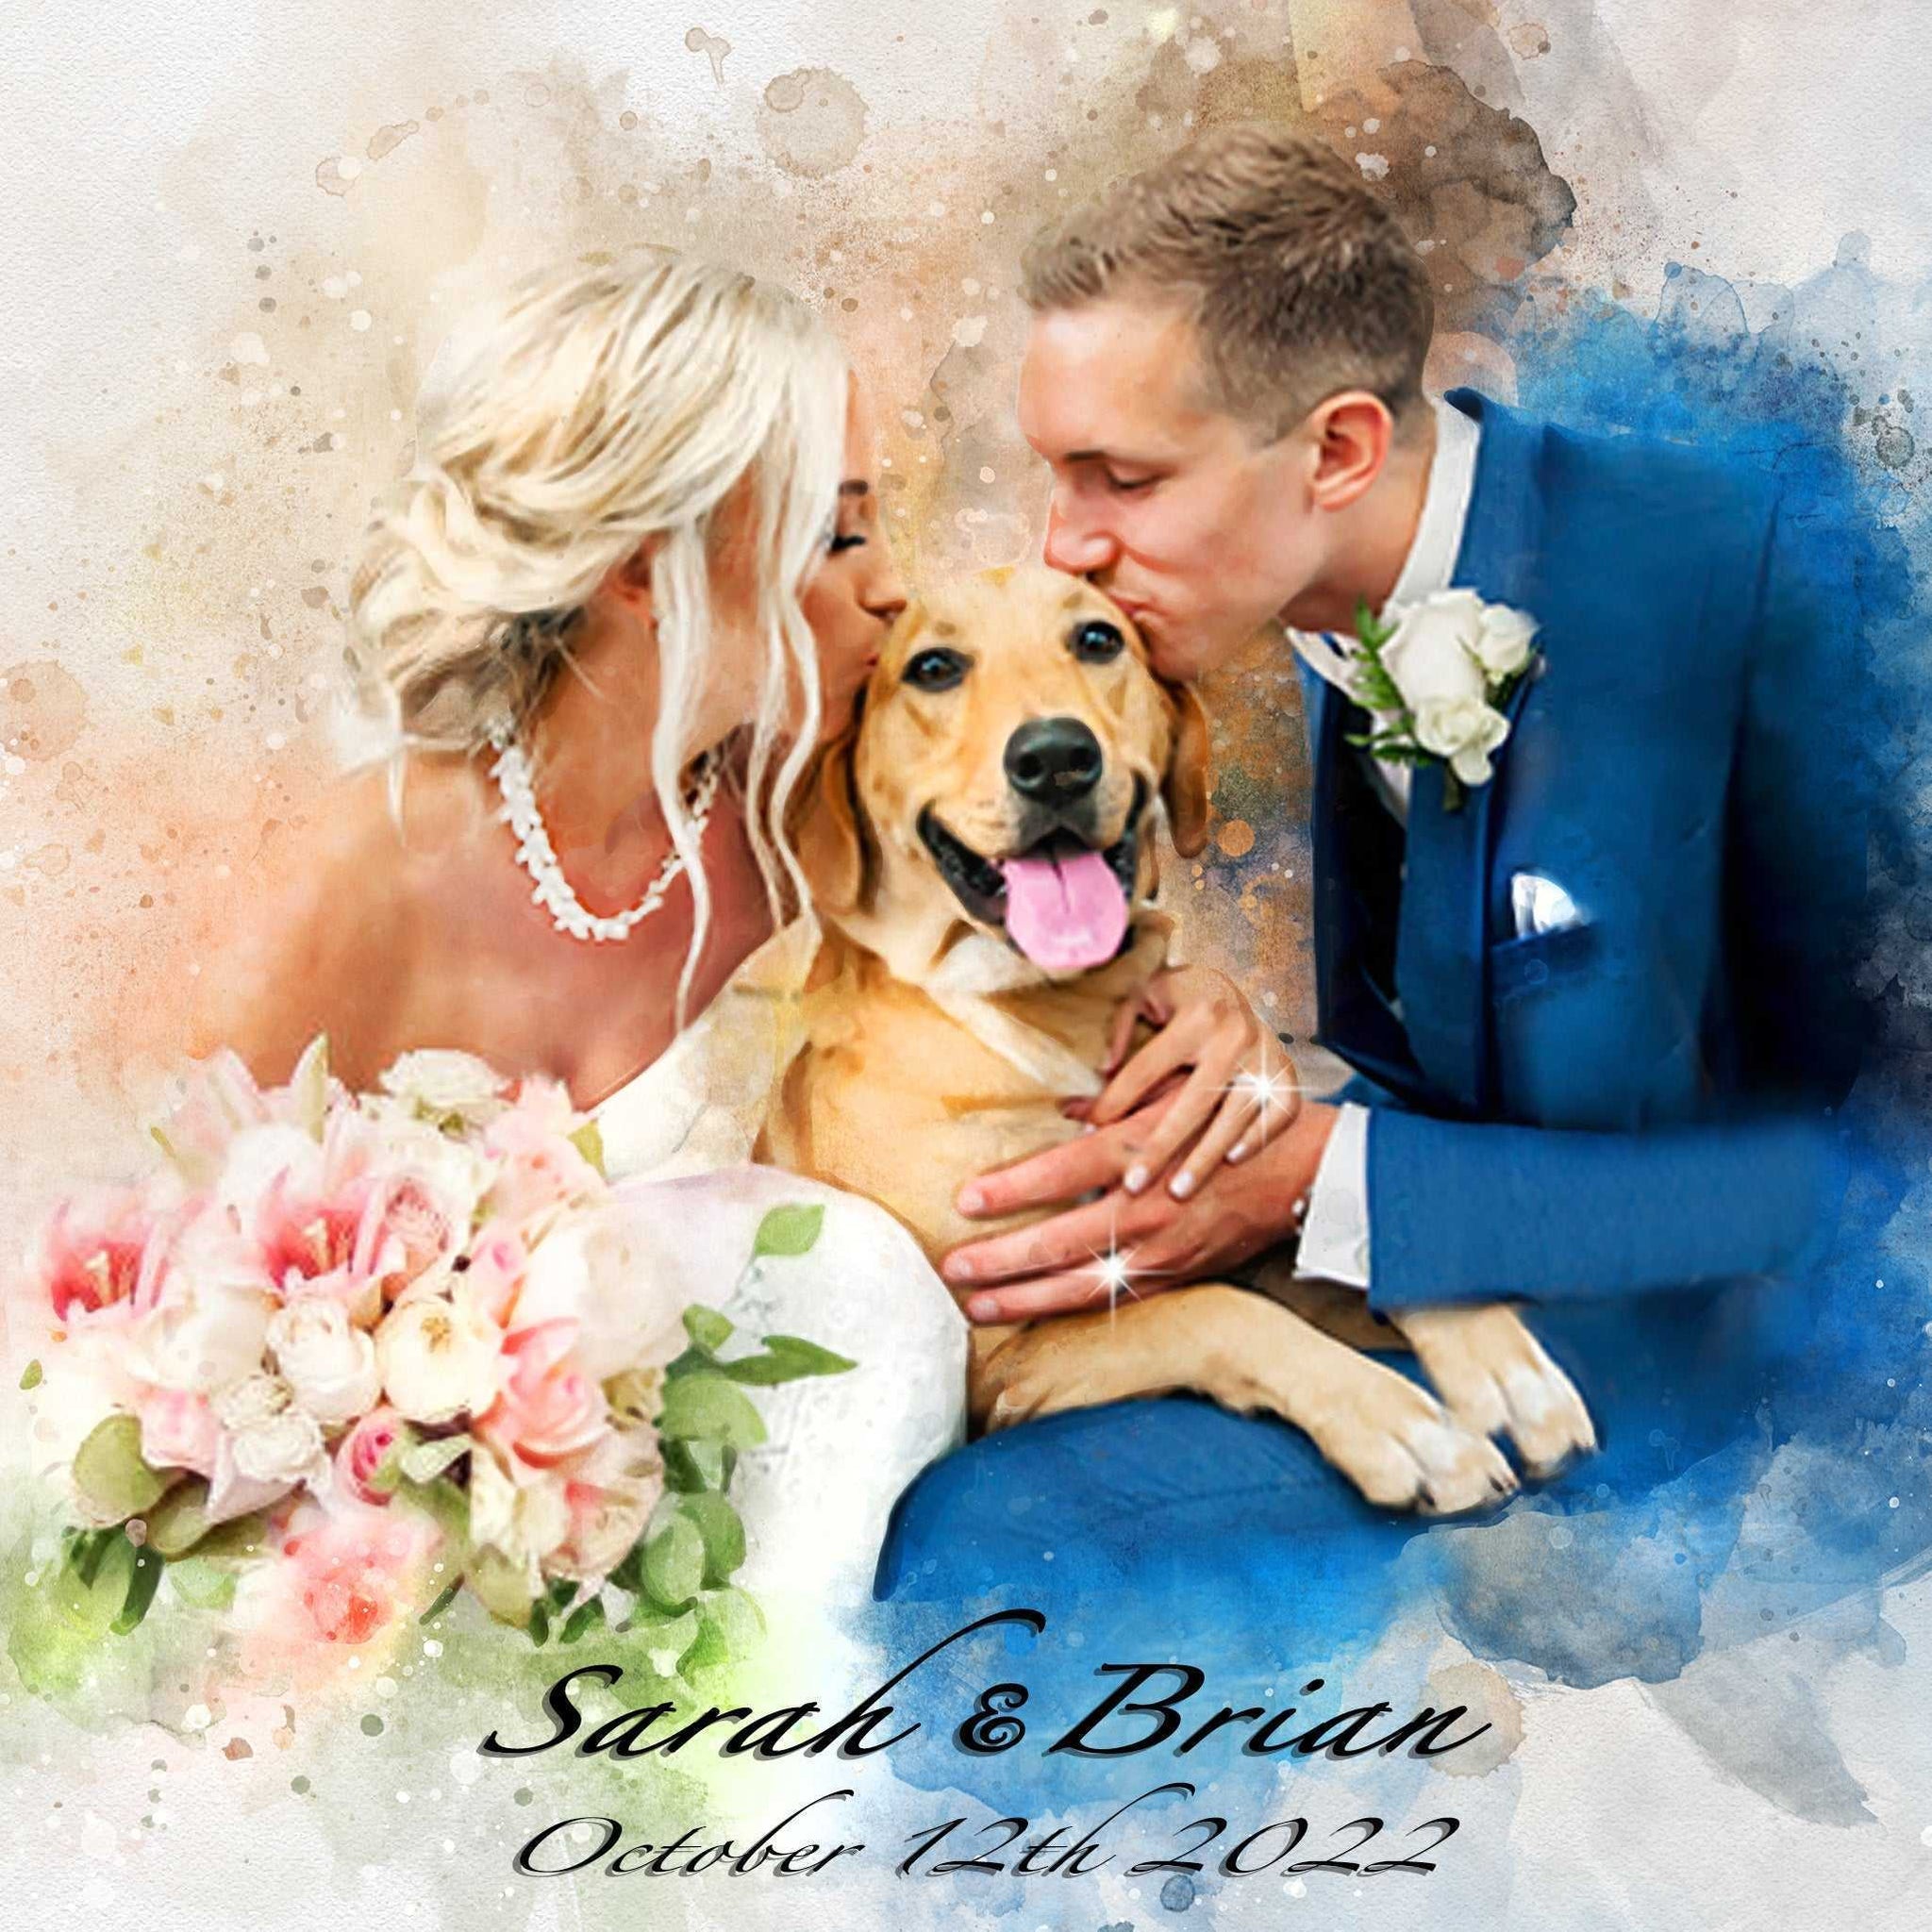 Unique Wedding Gift | Custom Wedding Painting |Personalized Wall Art - FromPicToArt